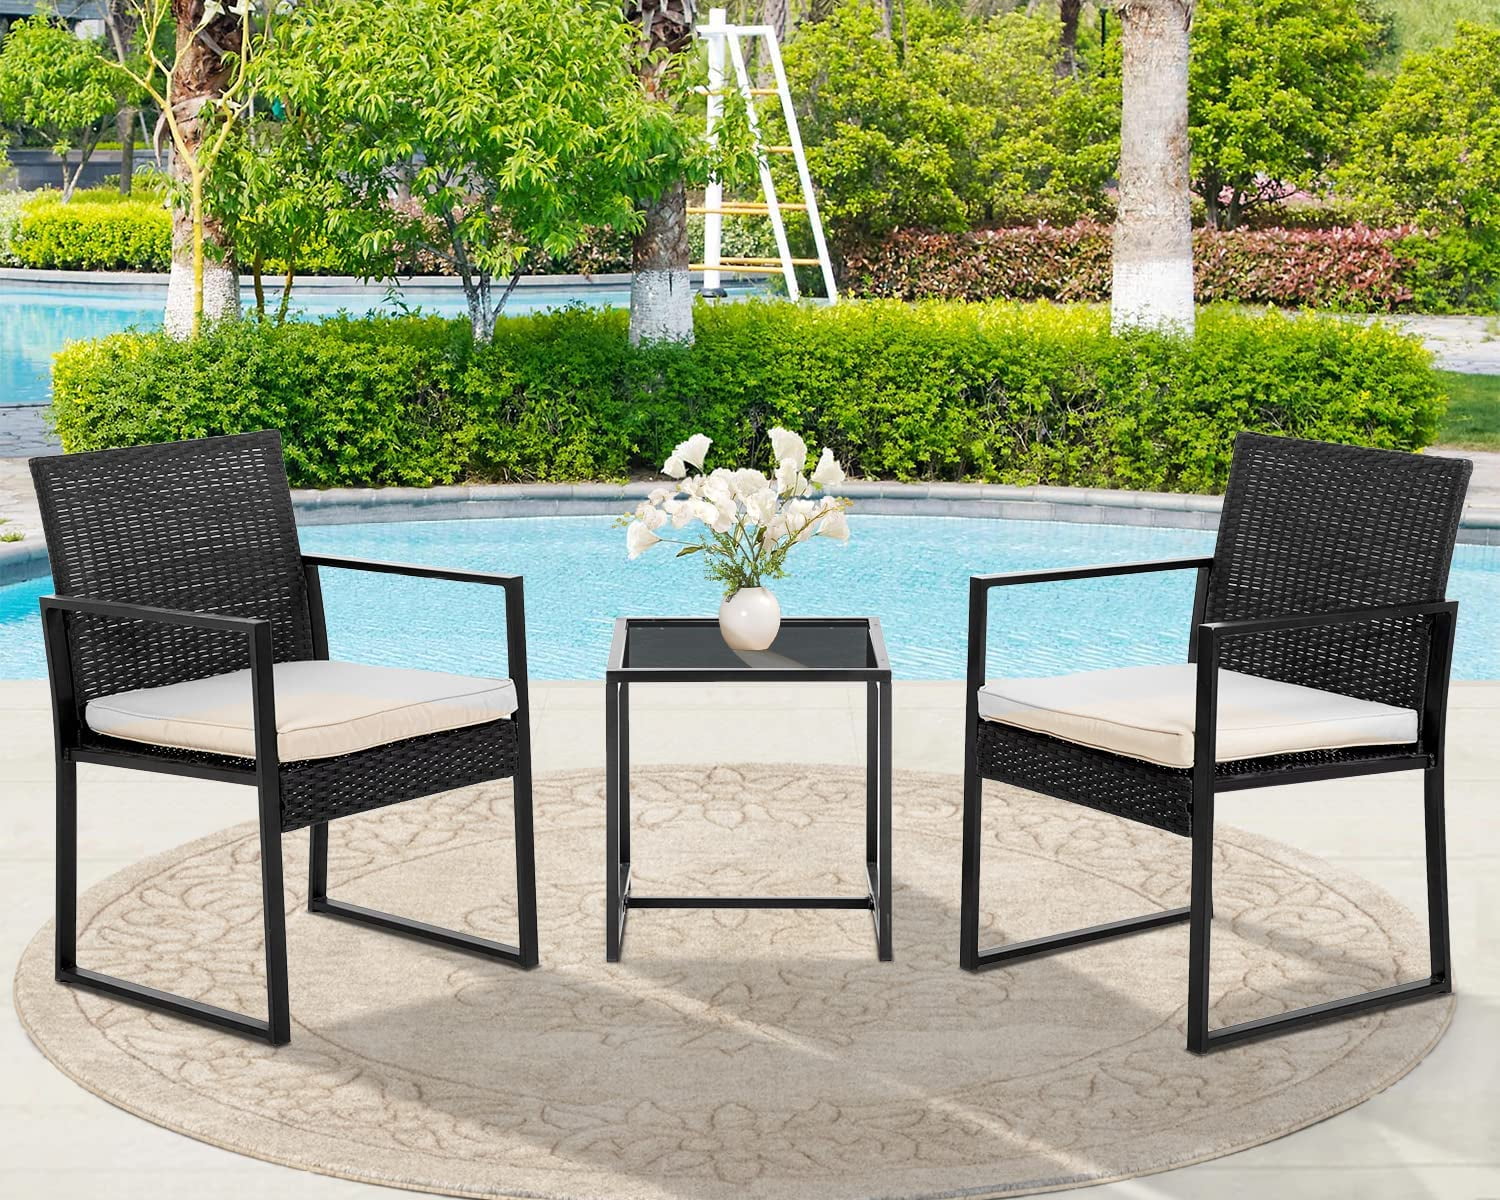 Grey Flamaker 3 Pieces Patio Set Outdoor Wicker Patio Furniture Sets Modern Bistro Set Rattan Chair Conversation Sets with Coffee Table for Yard and Bistro 